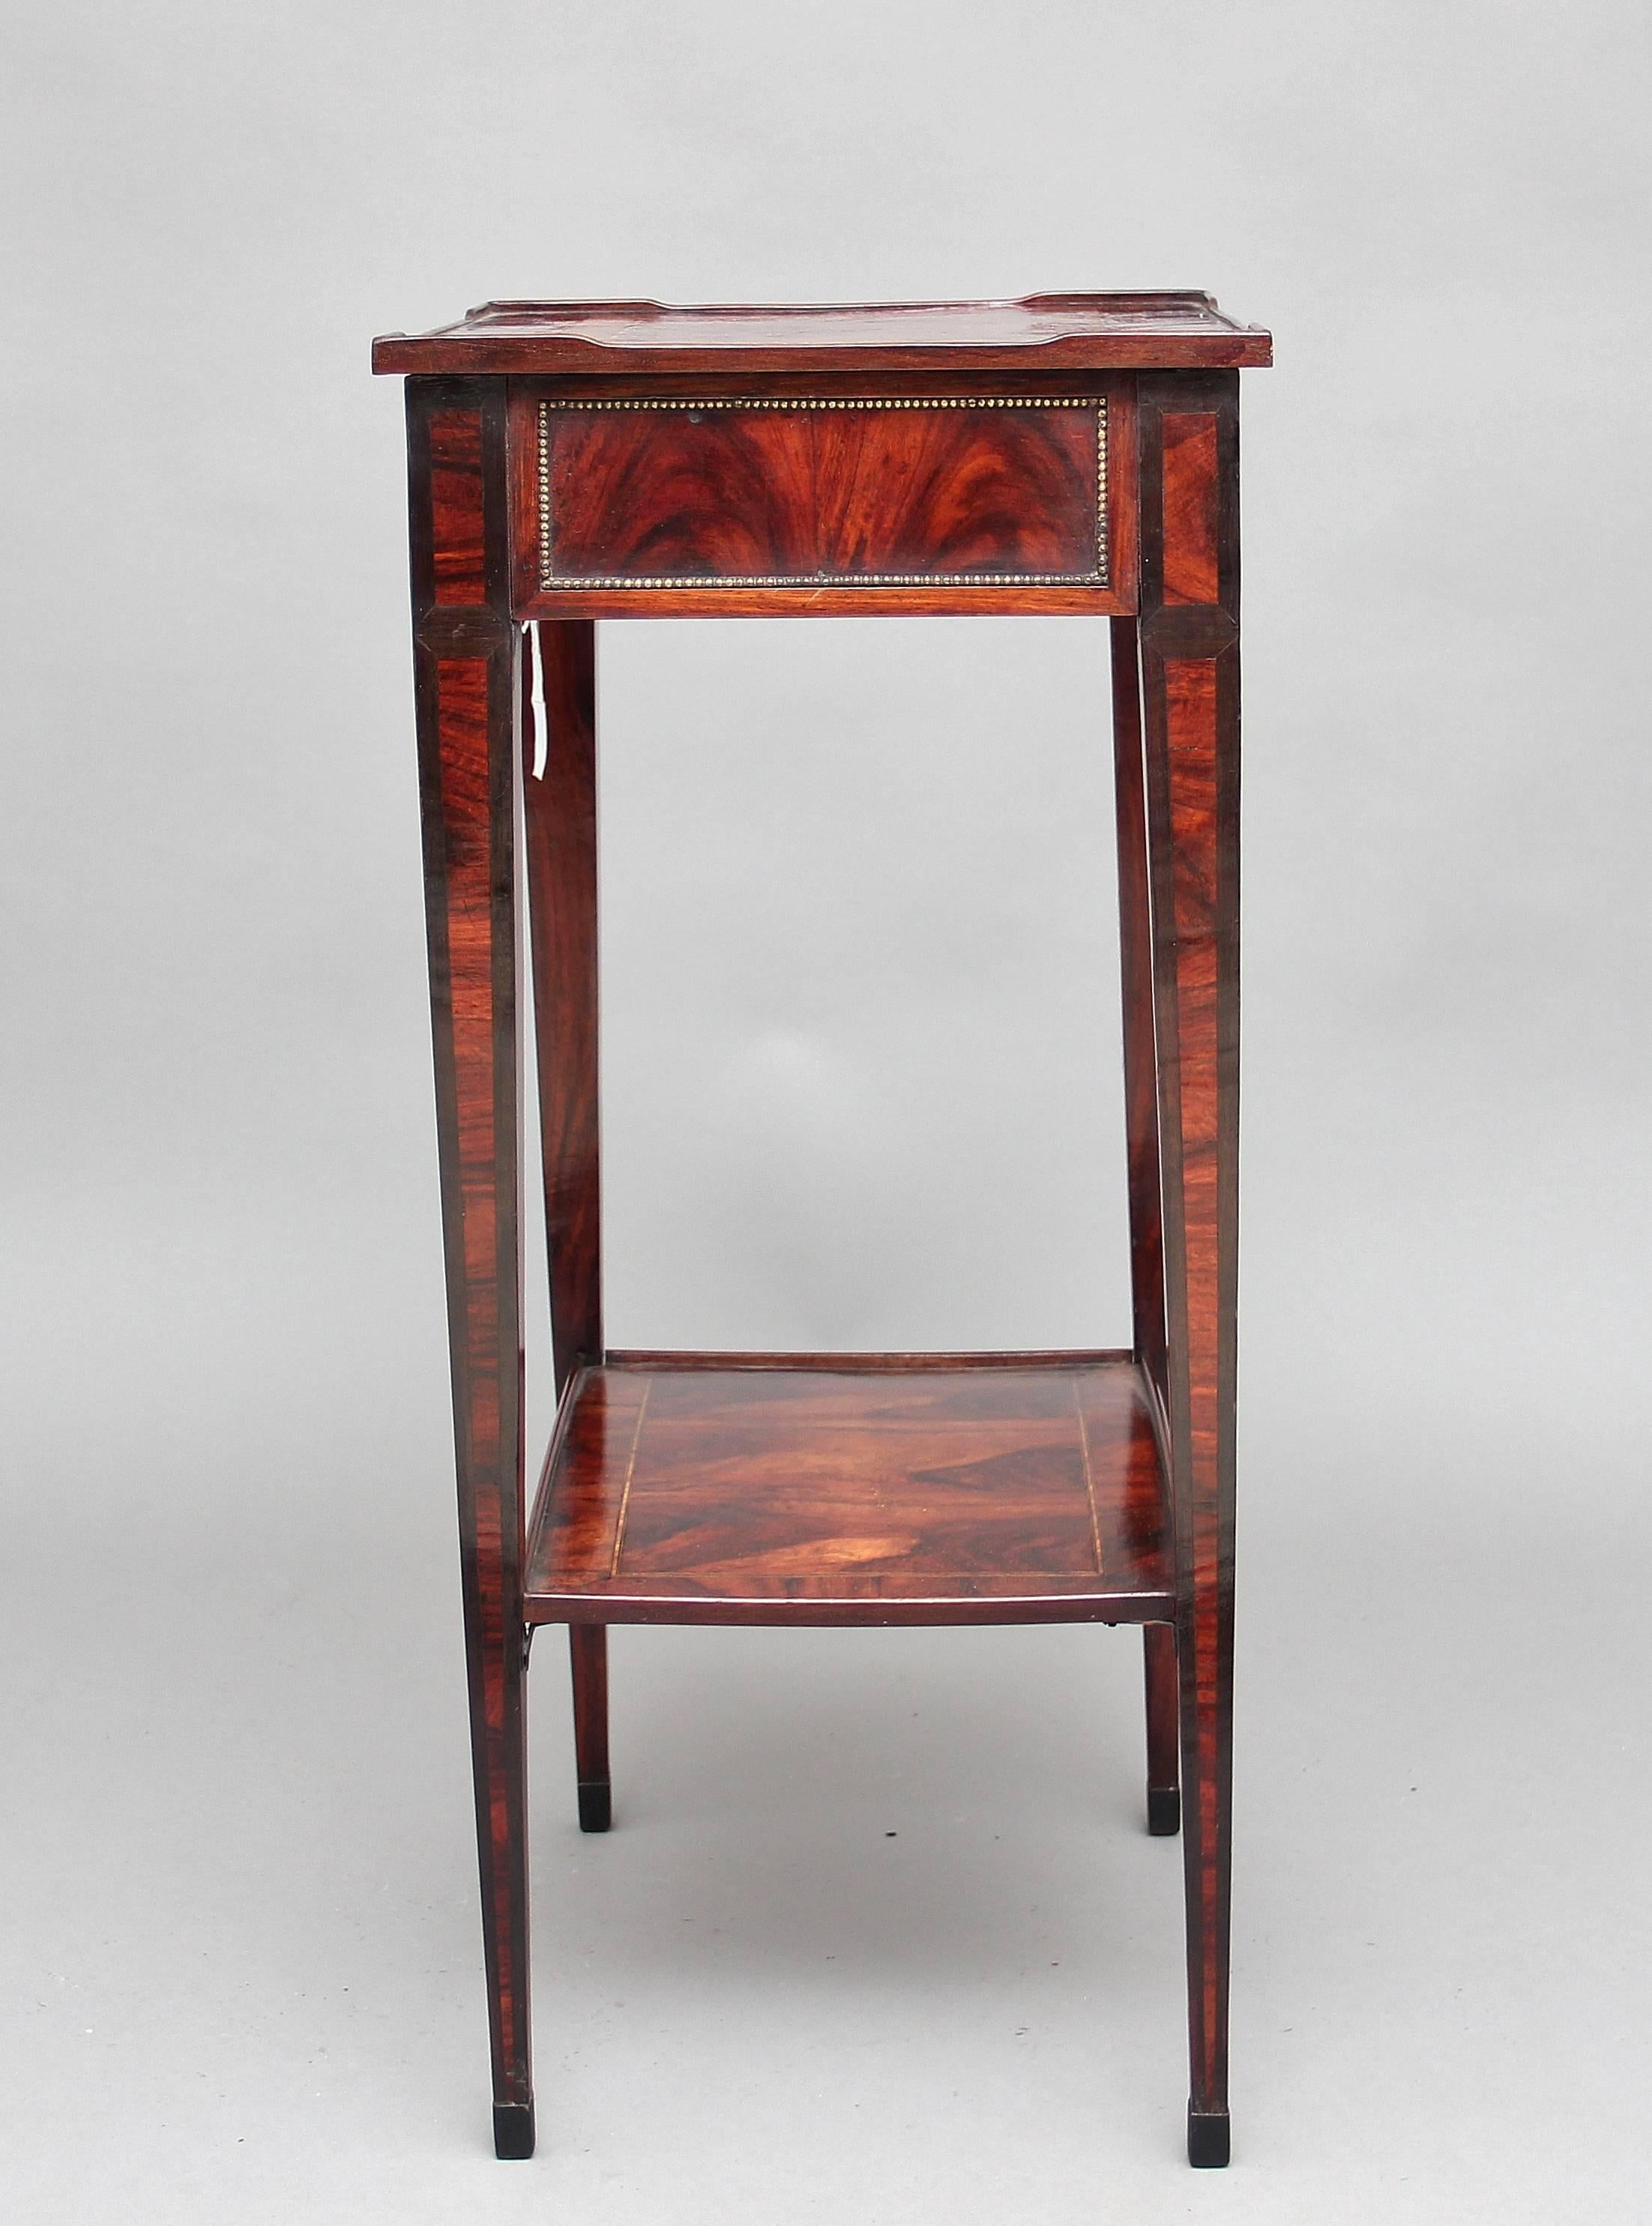 An unusual and rare 19th century continental specimen wood occasional / side table, the top inlaid with swags with a raised shaped gallery, below the frieze panels decorated with brass beading along the front, sides and back, with square tapering